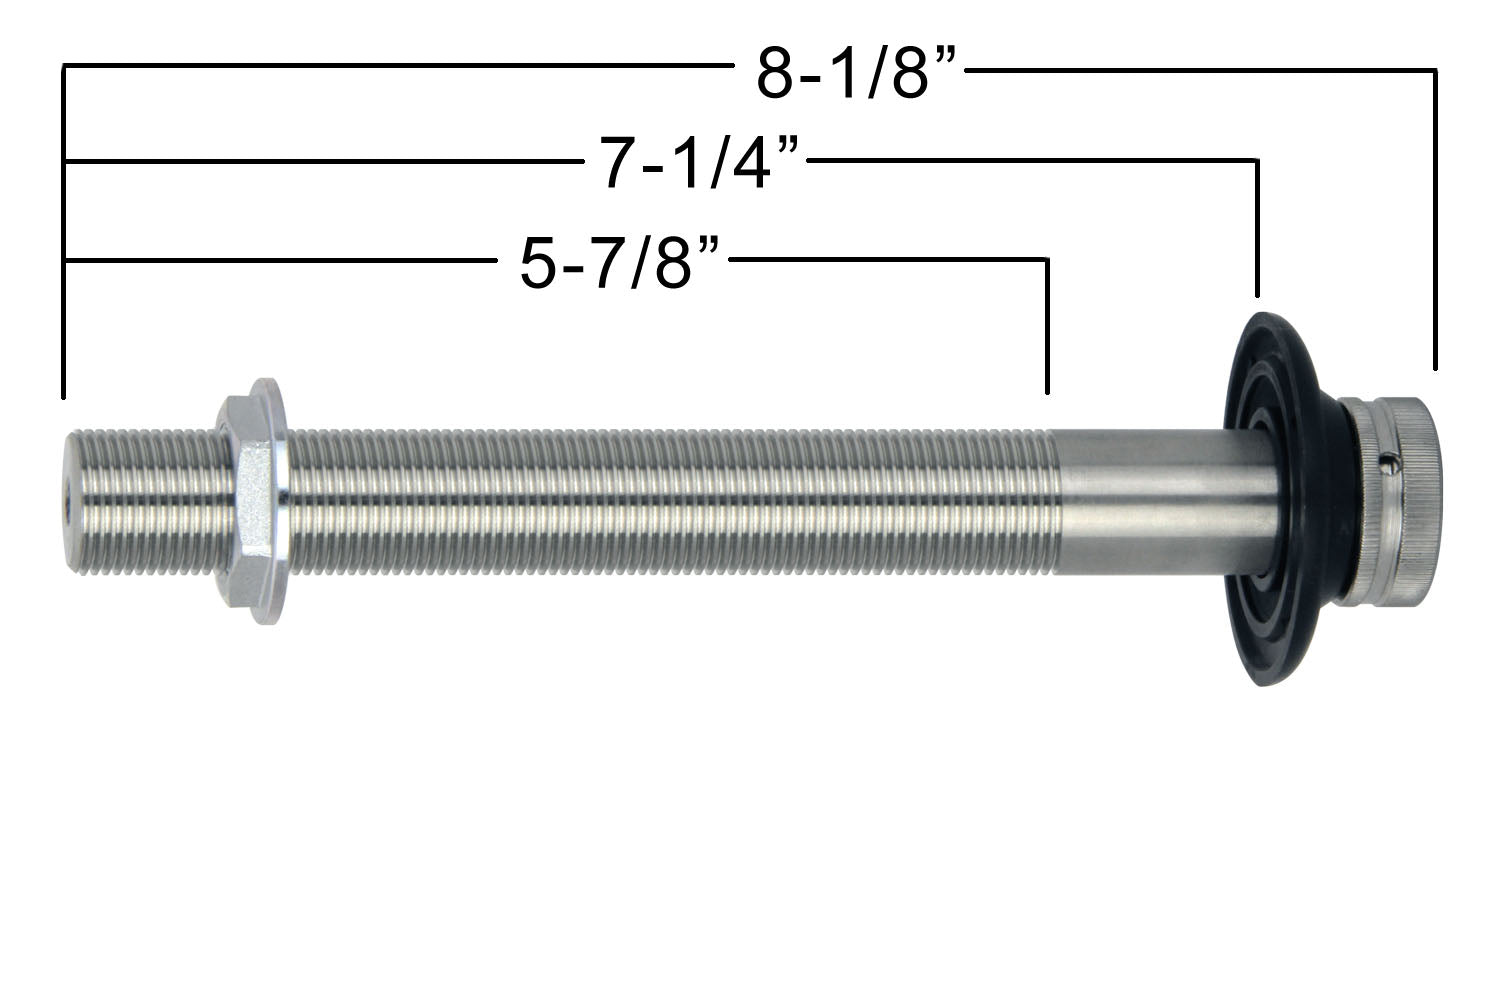 Shank Assembly Dimensions